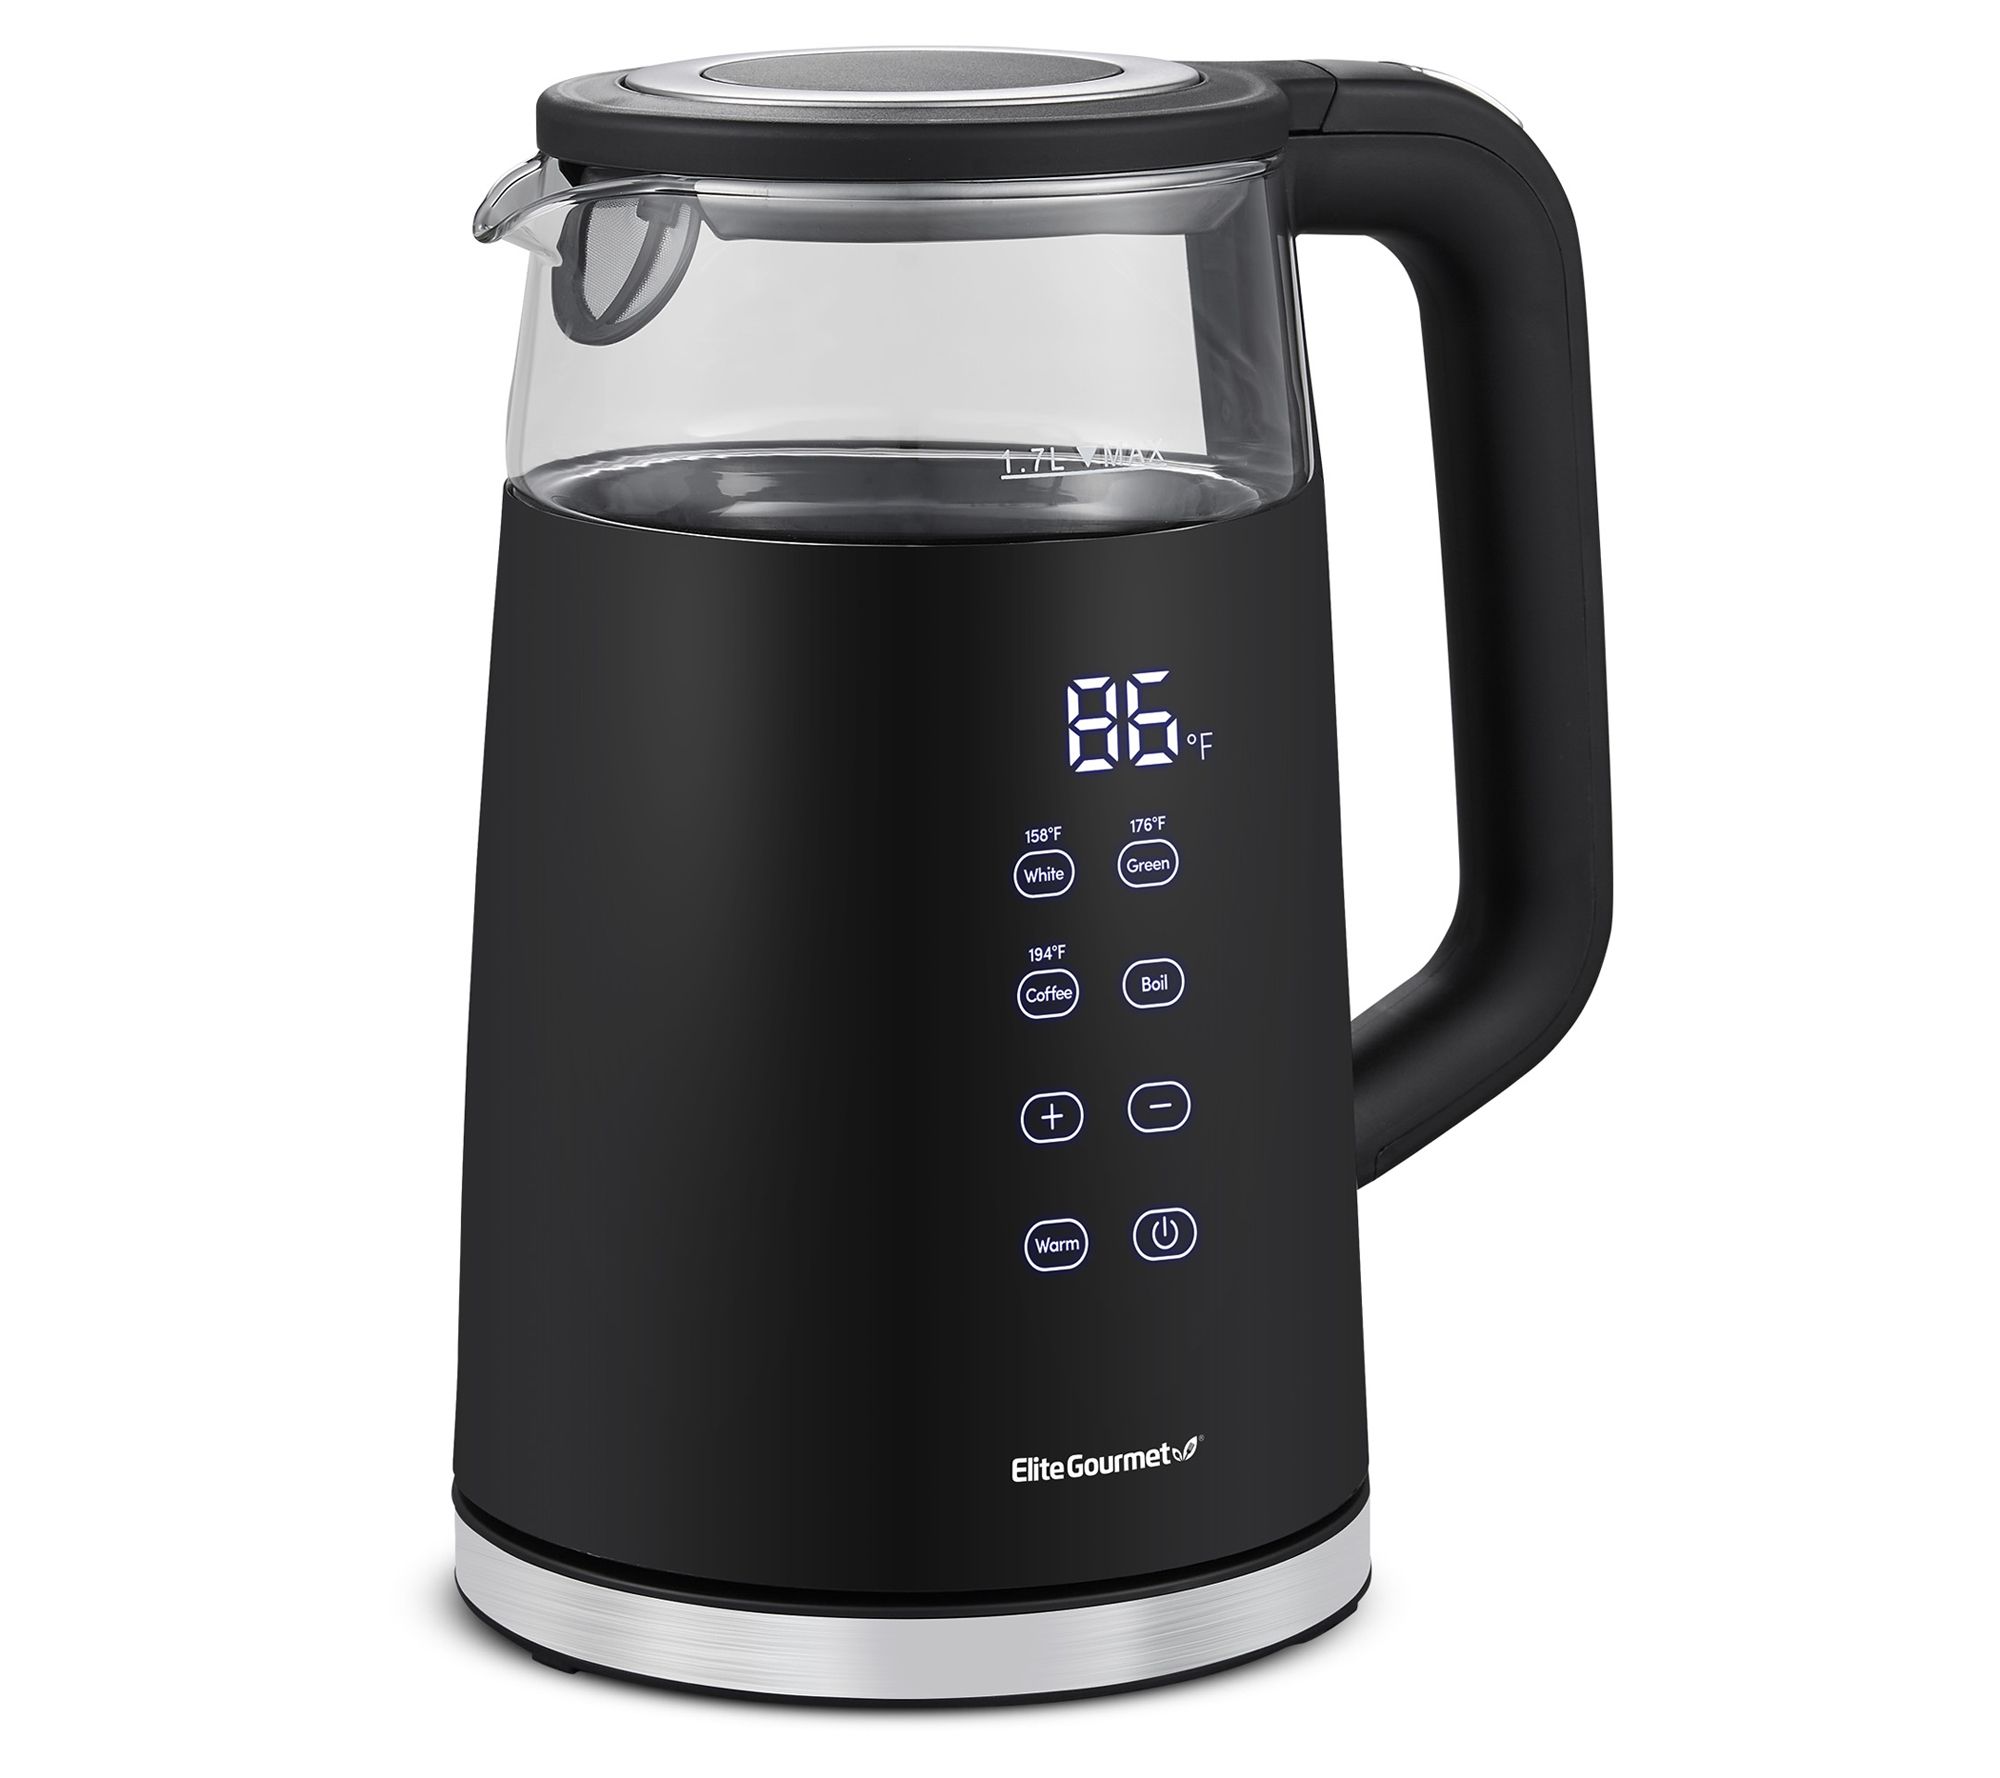 Elite Gourmet 1.7L Double Wall Cool Touch Electric Tea Kettle 